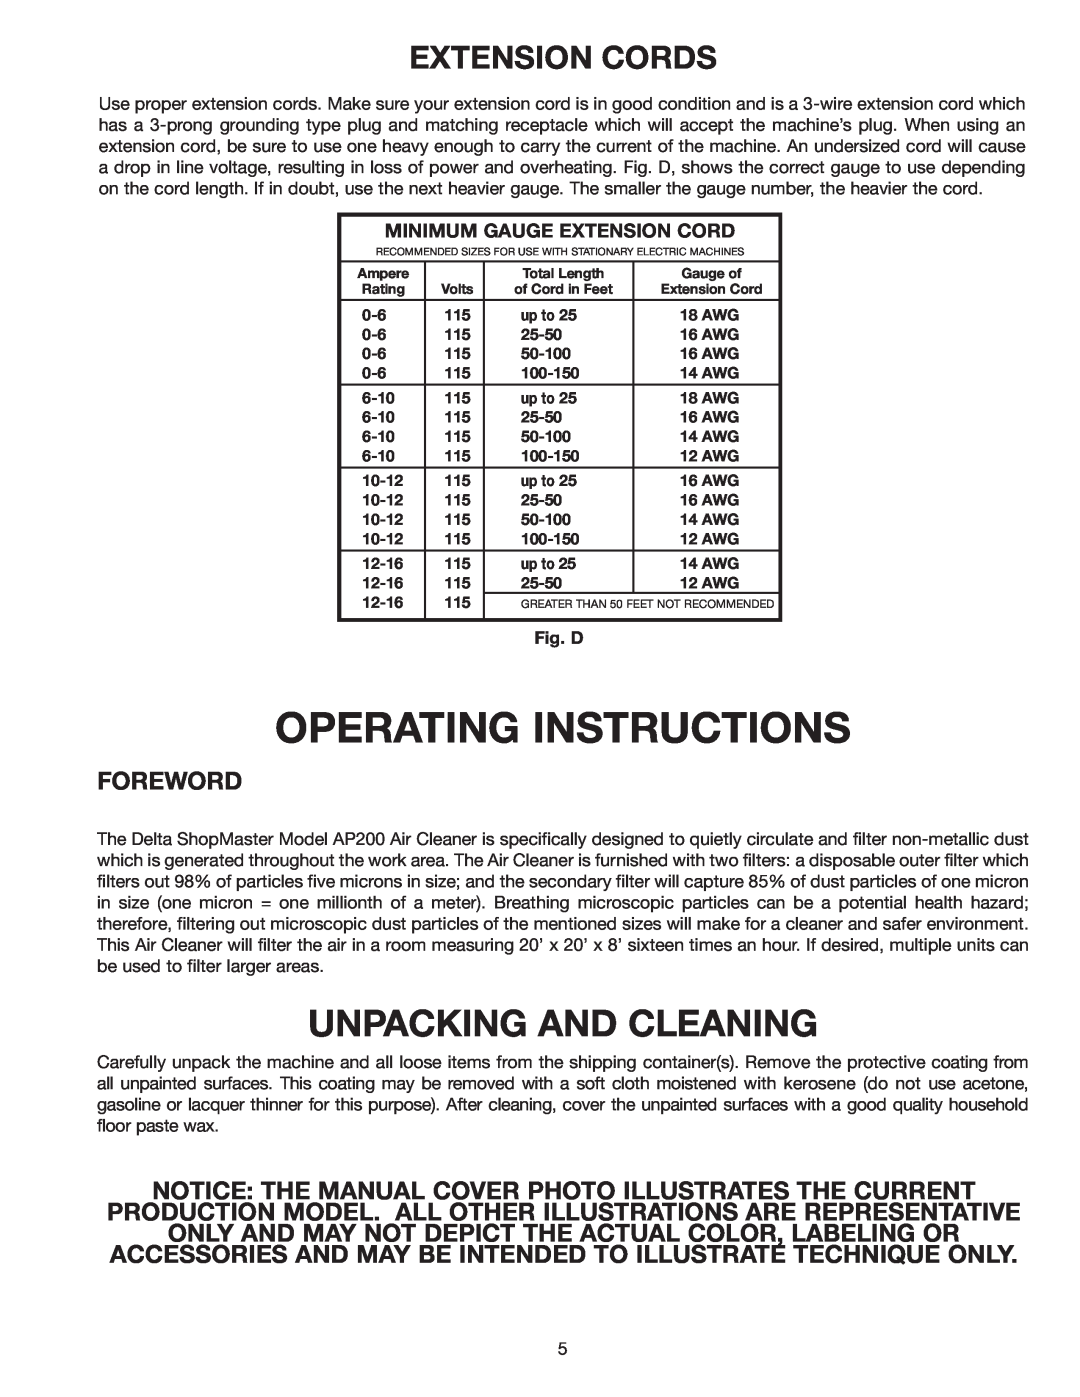 Delta AP200 instruction manual Unpacking And Cleaning, Extension Cords, Operating Instructions 